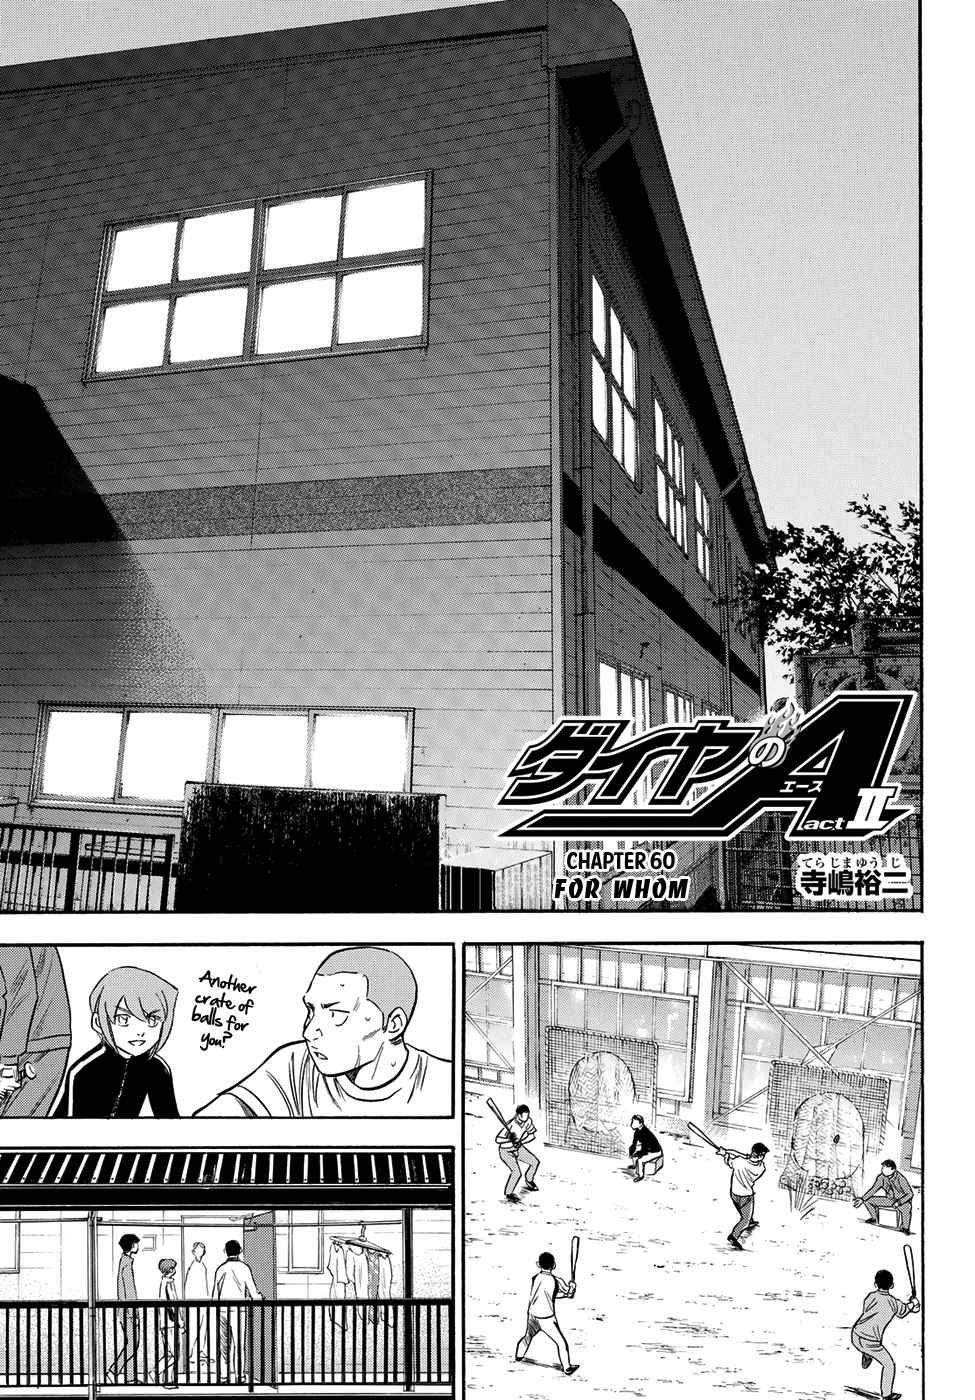 Diamond no Ace Act II Vol. 7 Ch. 60 For Whom